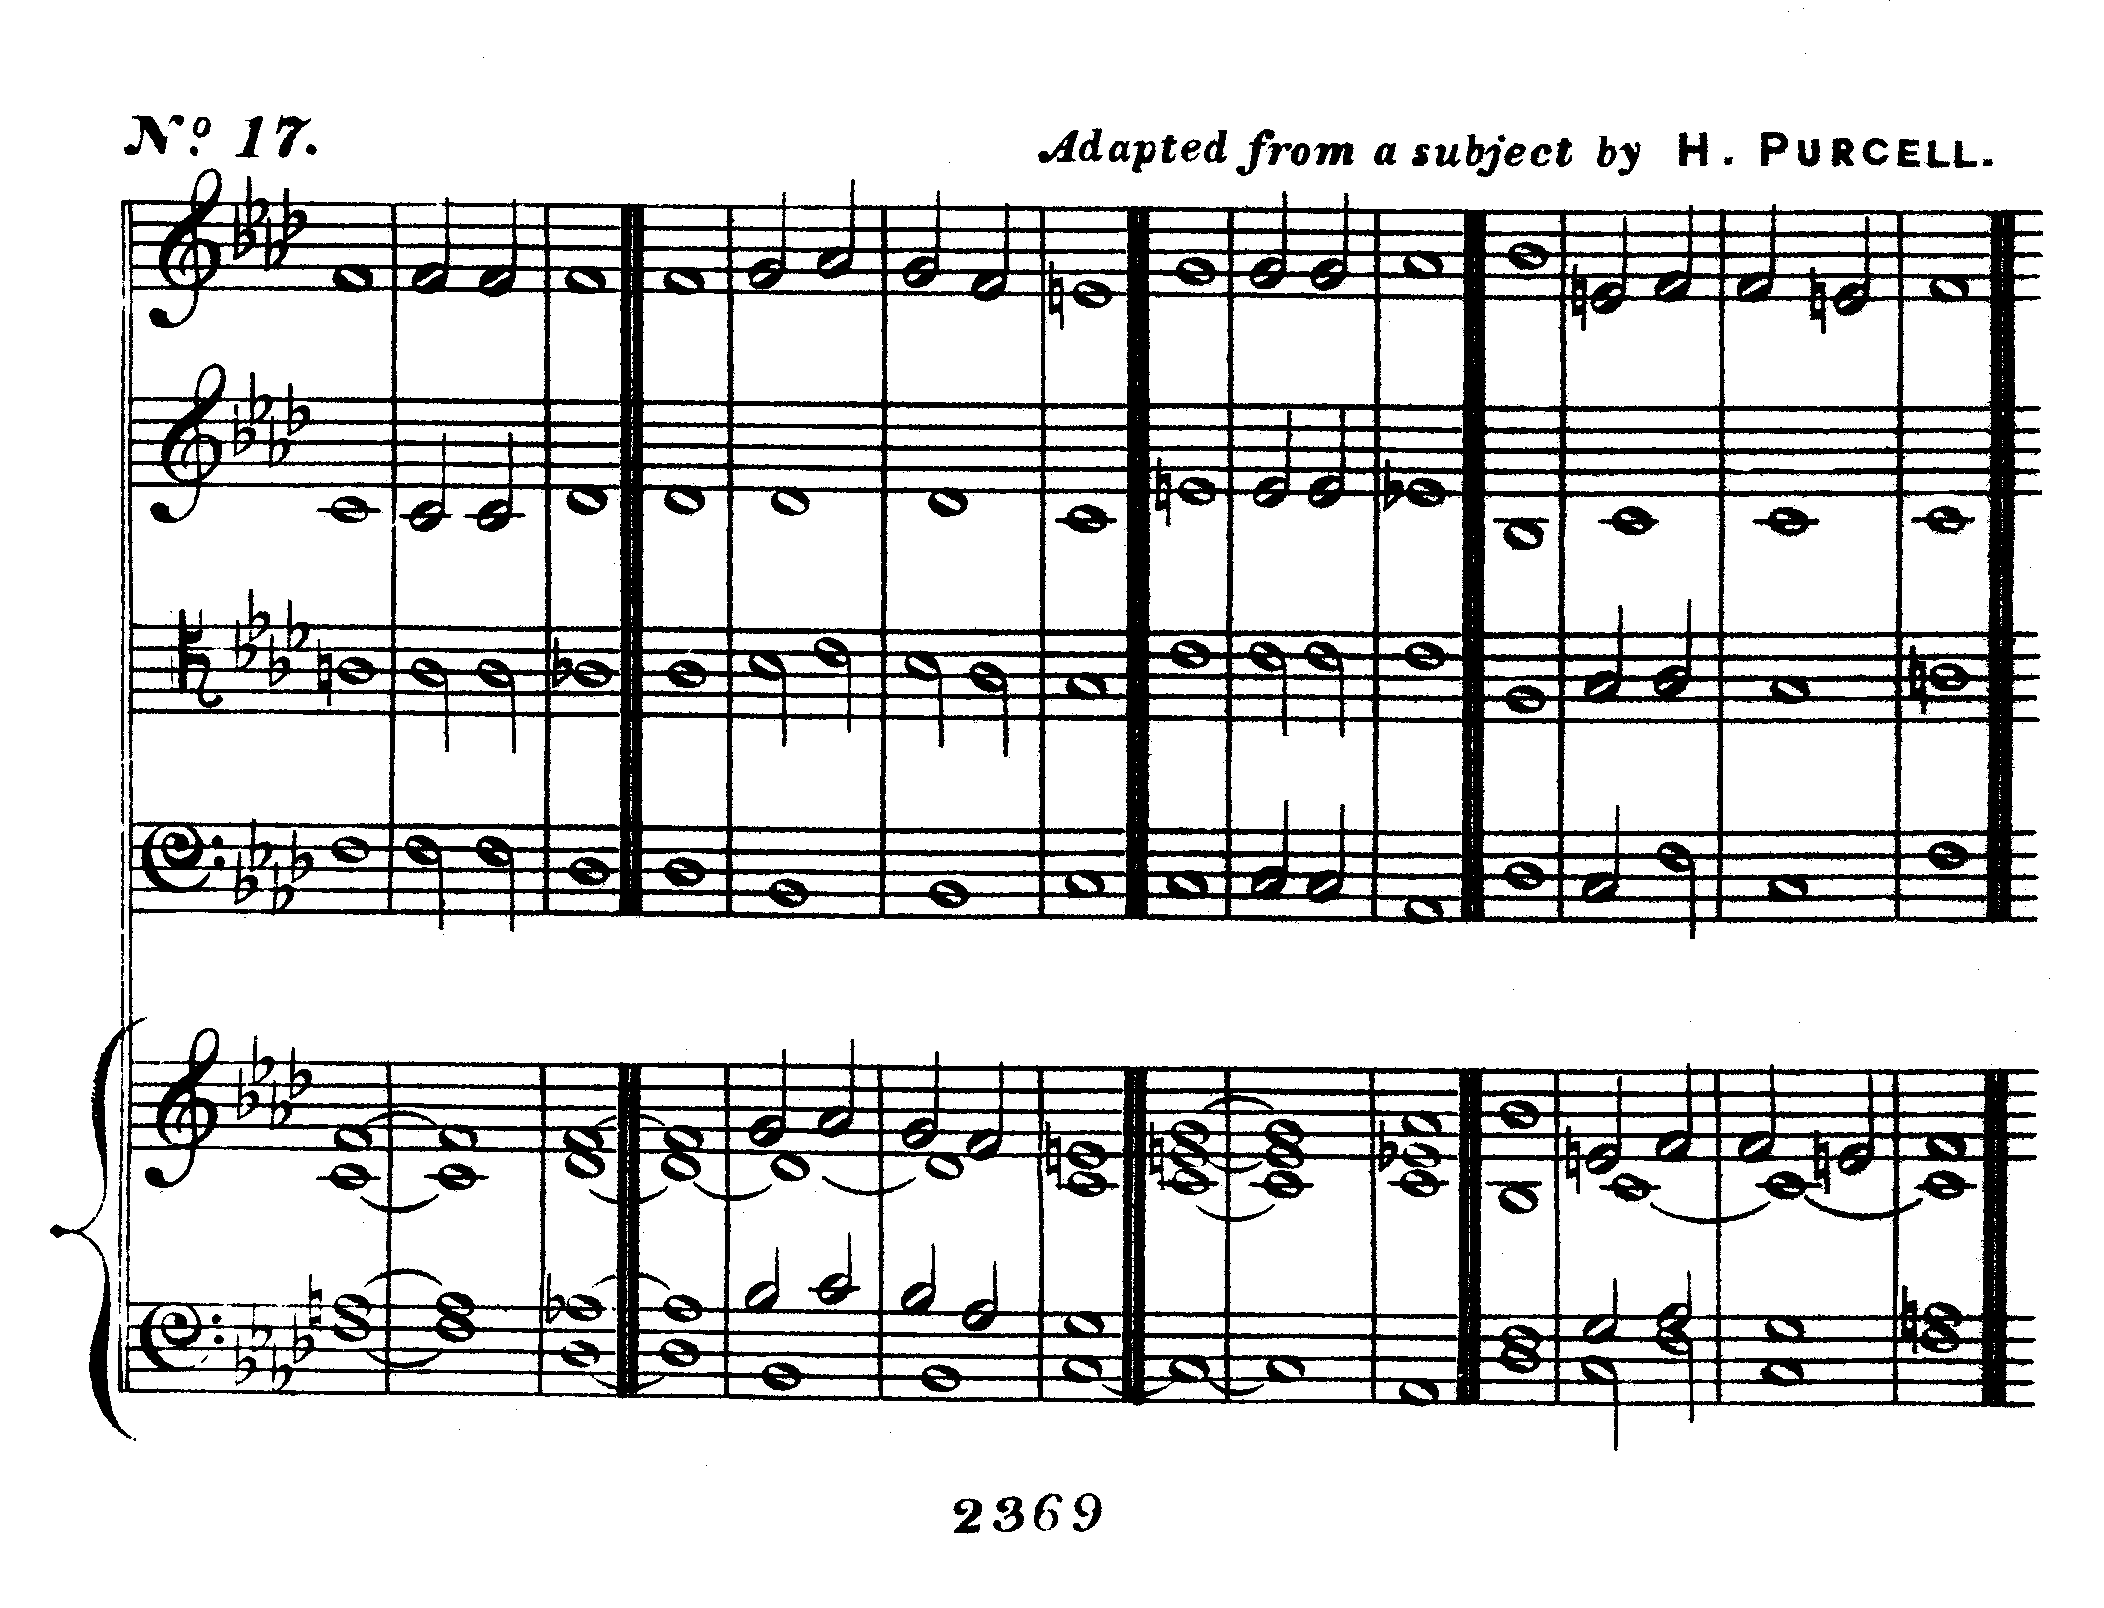 Double chant in F minor adapted from a subject by H Purcell set to Psalm 130